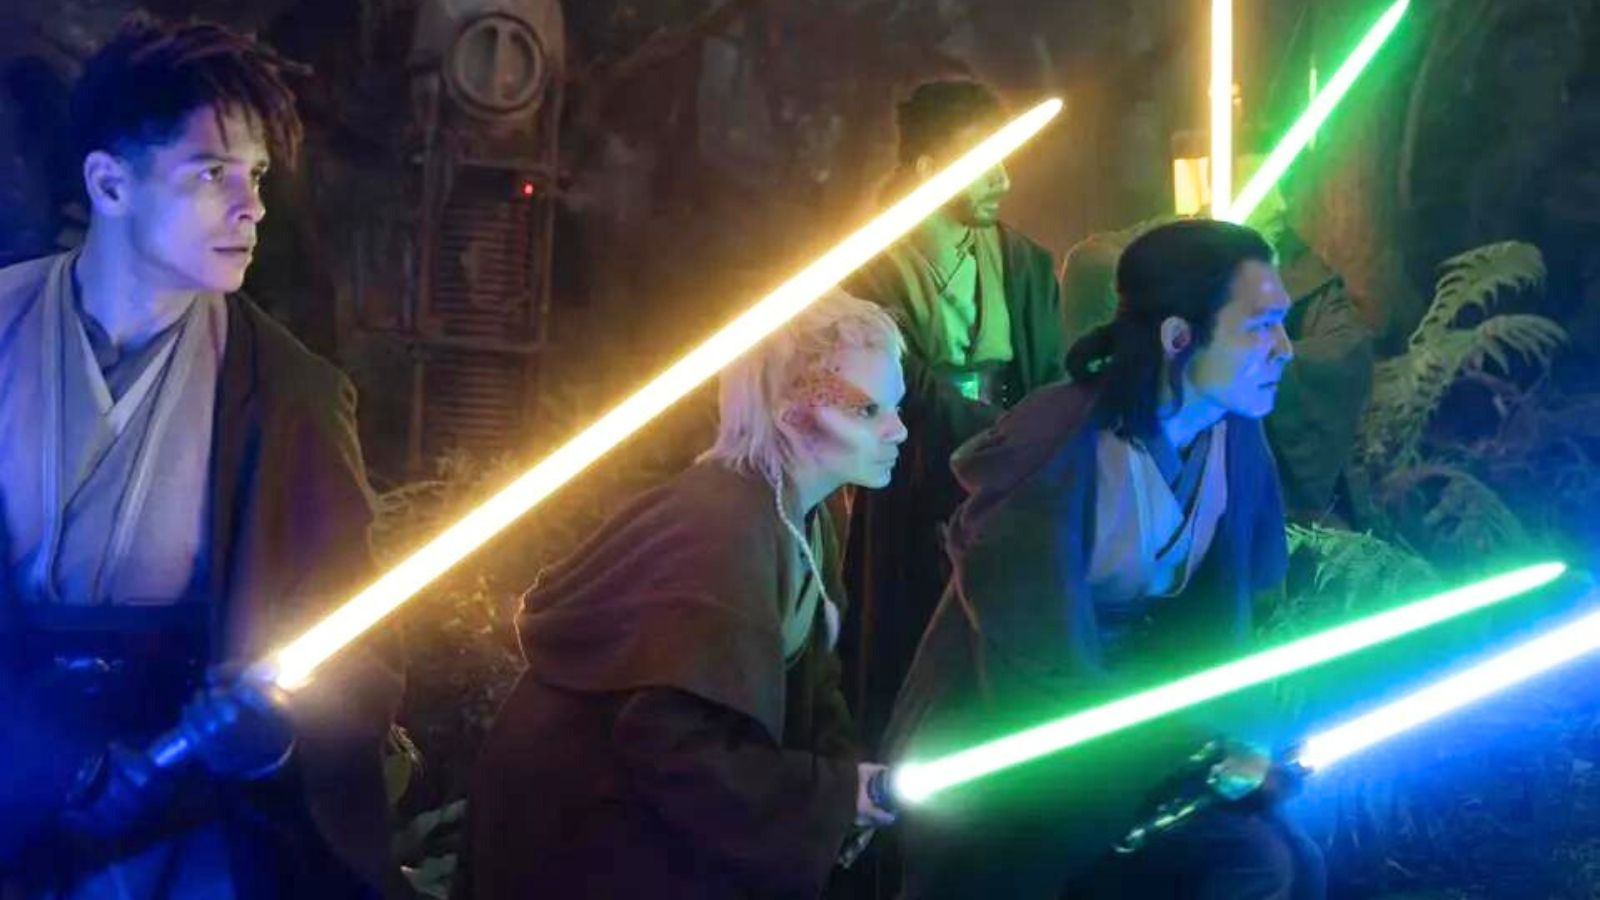 Yord Fandar, Jecki Lon, Sol, and two other Jedi Knights brandish their lightsabers in The Acolyte